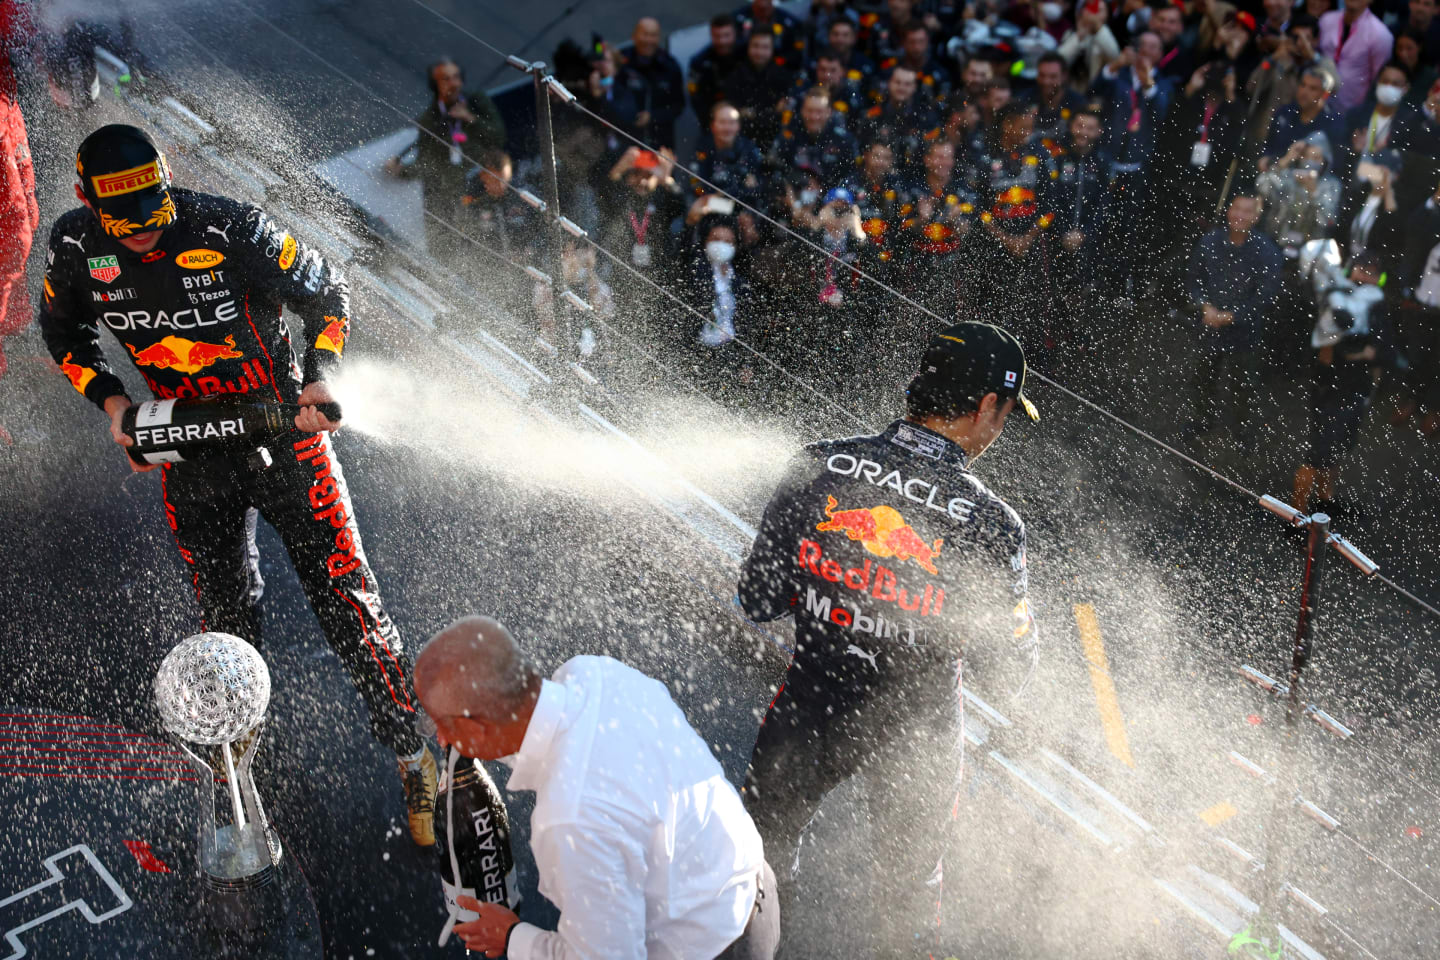 SUZUKA, JAPAN - OCTOBER 09: Race winner and 2022 F1 World Drivers Champion Max Verstappen of Netherlands and Oracle Red Bull Racing and Second placed Sergio Perez of Mexico and Oracle Red Bull Racing celebrate on the podium during the F1 Grand Prix of Japan at Suzuka International Racing Course on October 09, 2022 in Suzuka, Japan. (Photo by Mark Thompson/Getty Images )